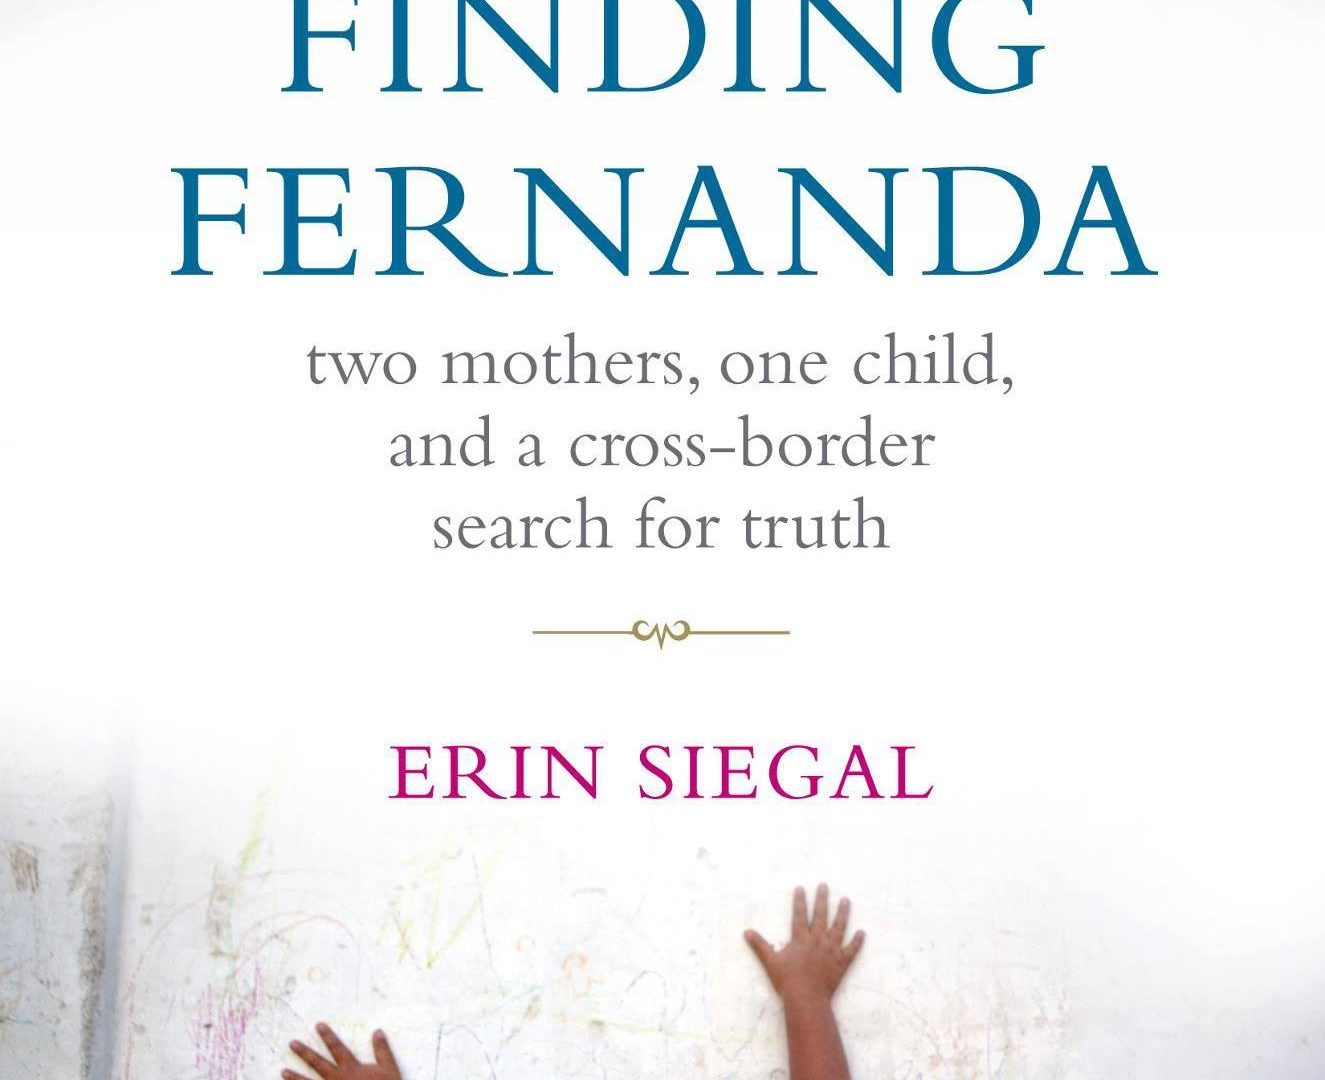 Image of book cover "Finding Fernanda: two mothers, one child, and a cross-border search for truth by Erin Siegal" with a child reaching up toward the book title.